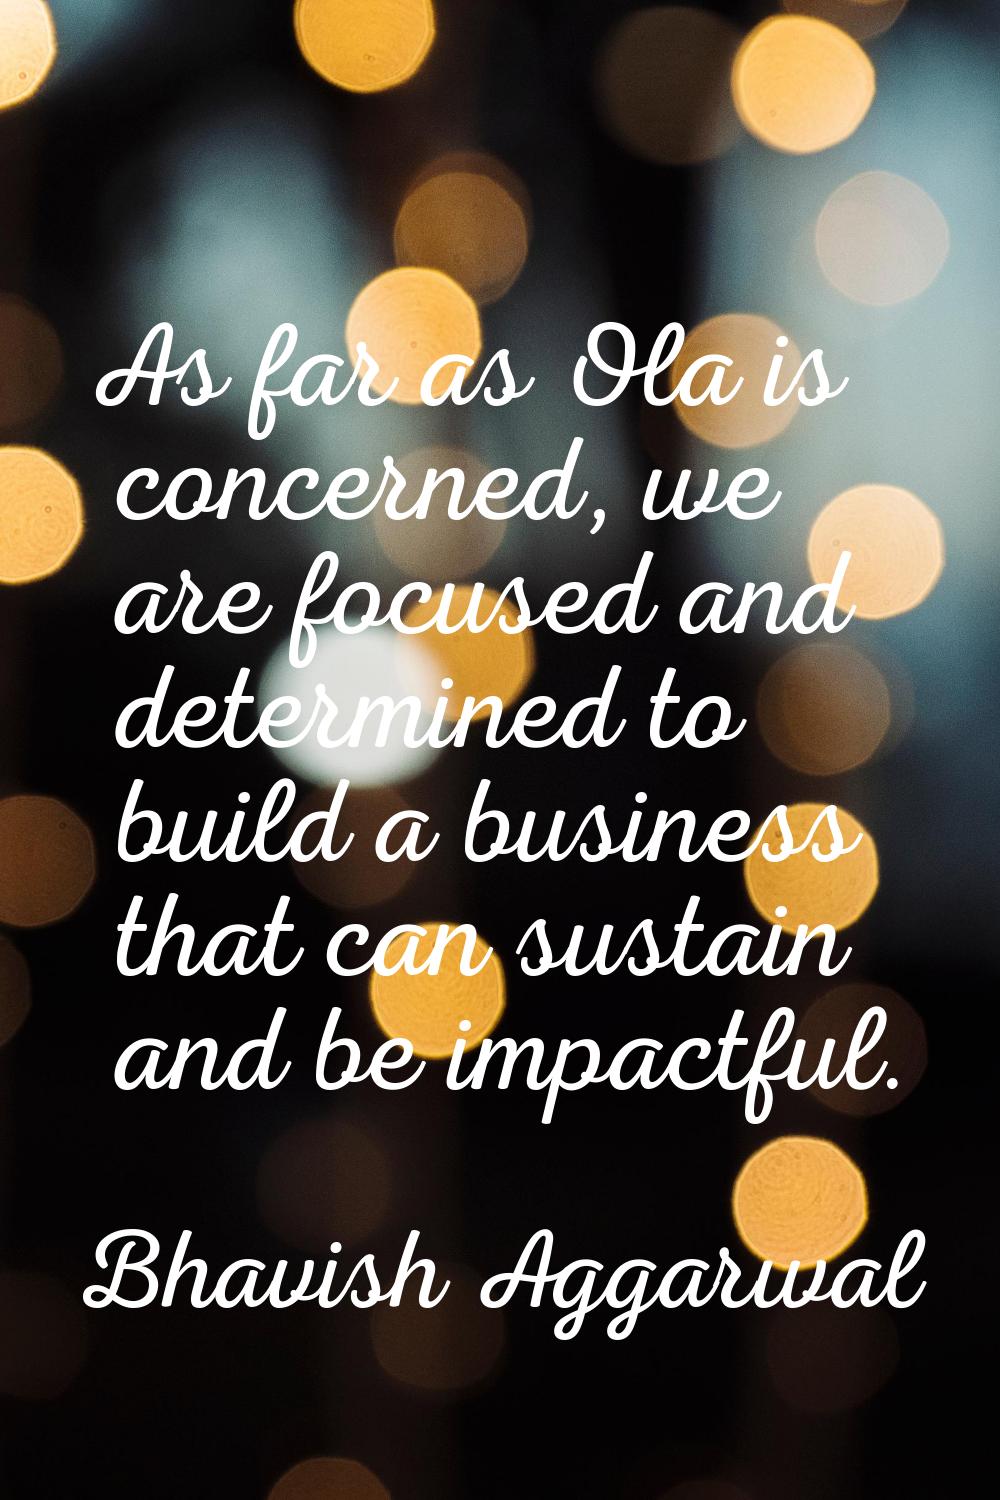 As far as Ola is concerned, we are focused and determined to build a business that can sustain and 